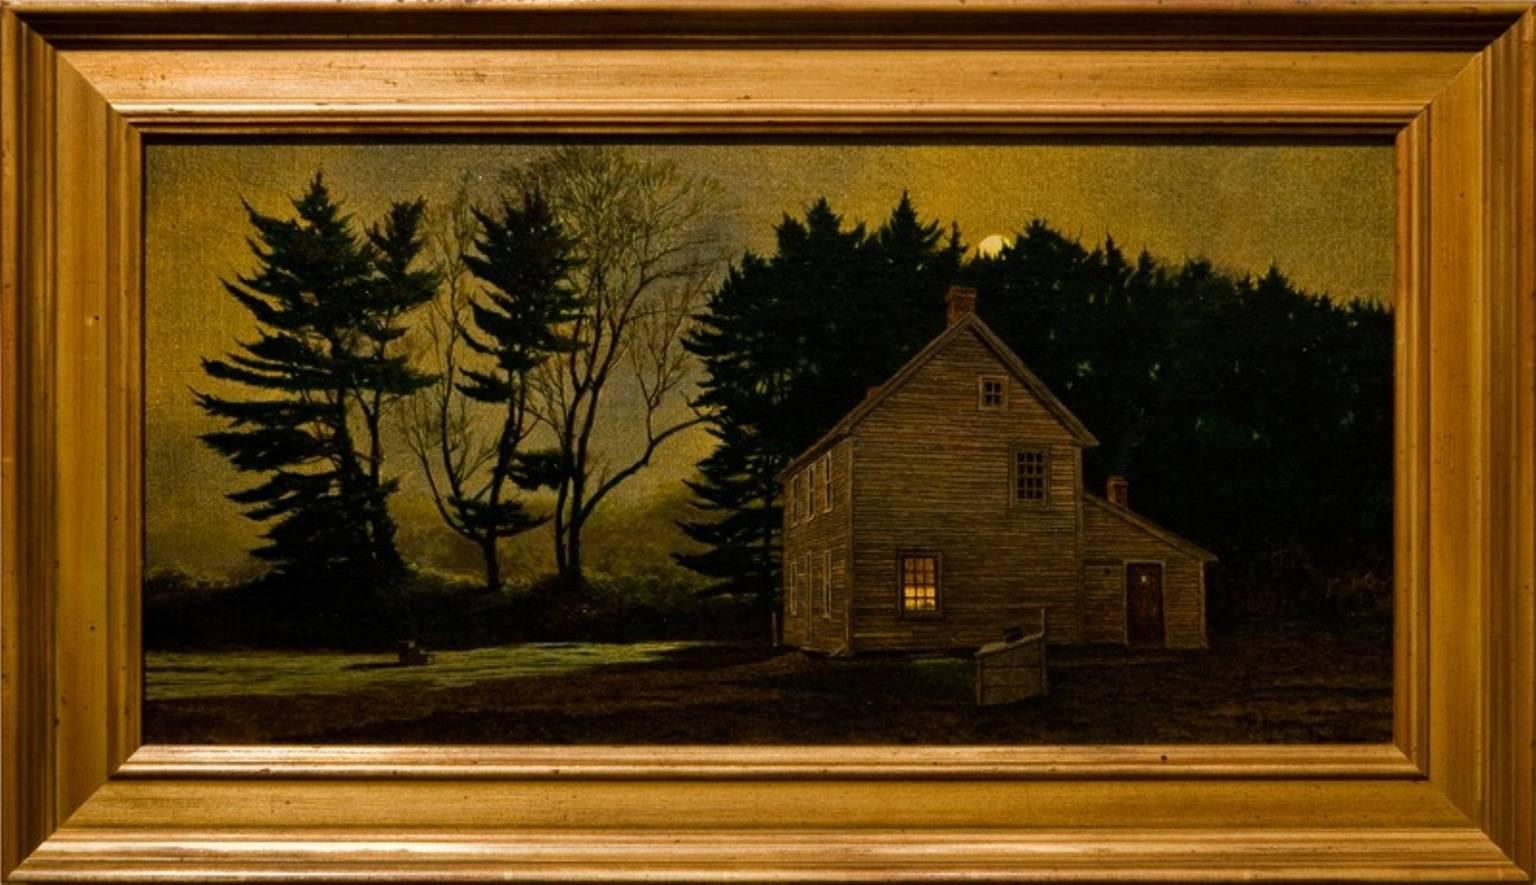 Peter Sculthorpe Landscape Painting - "The Eastern Moon"